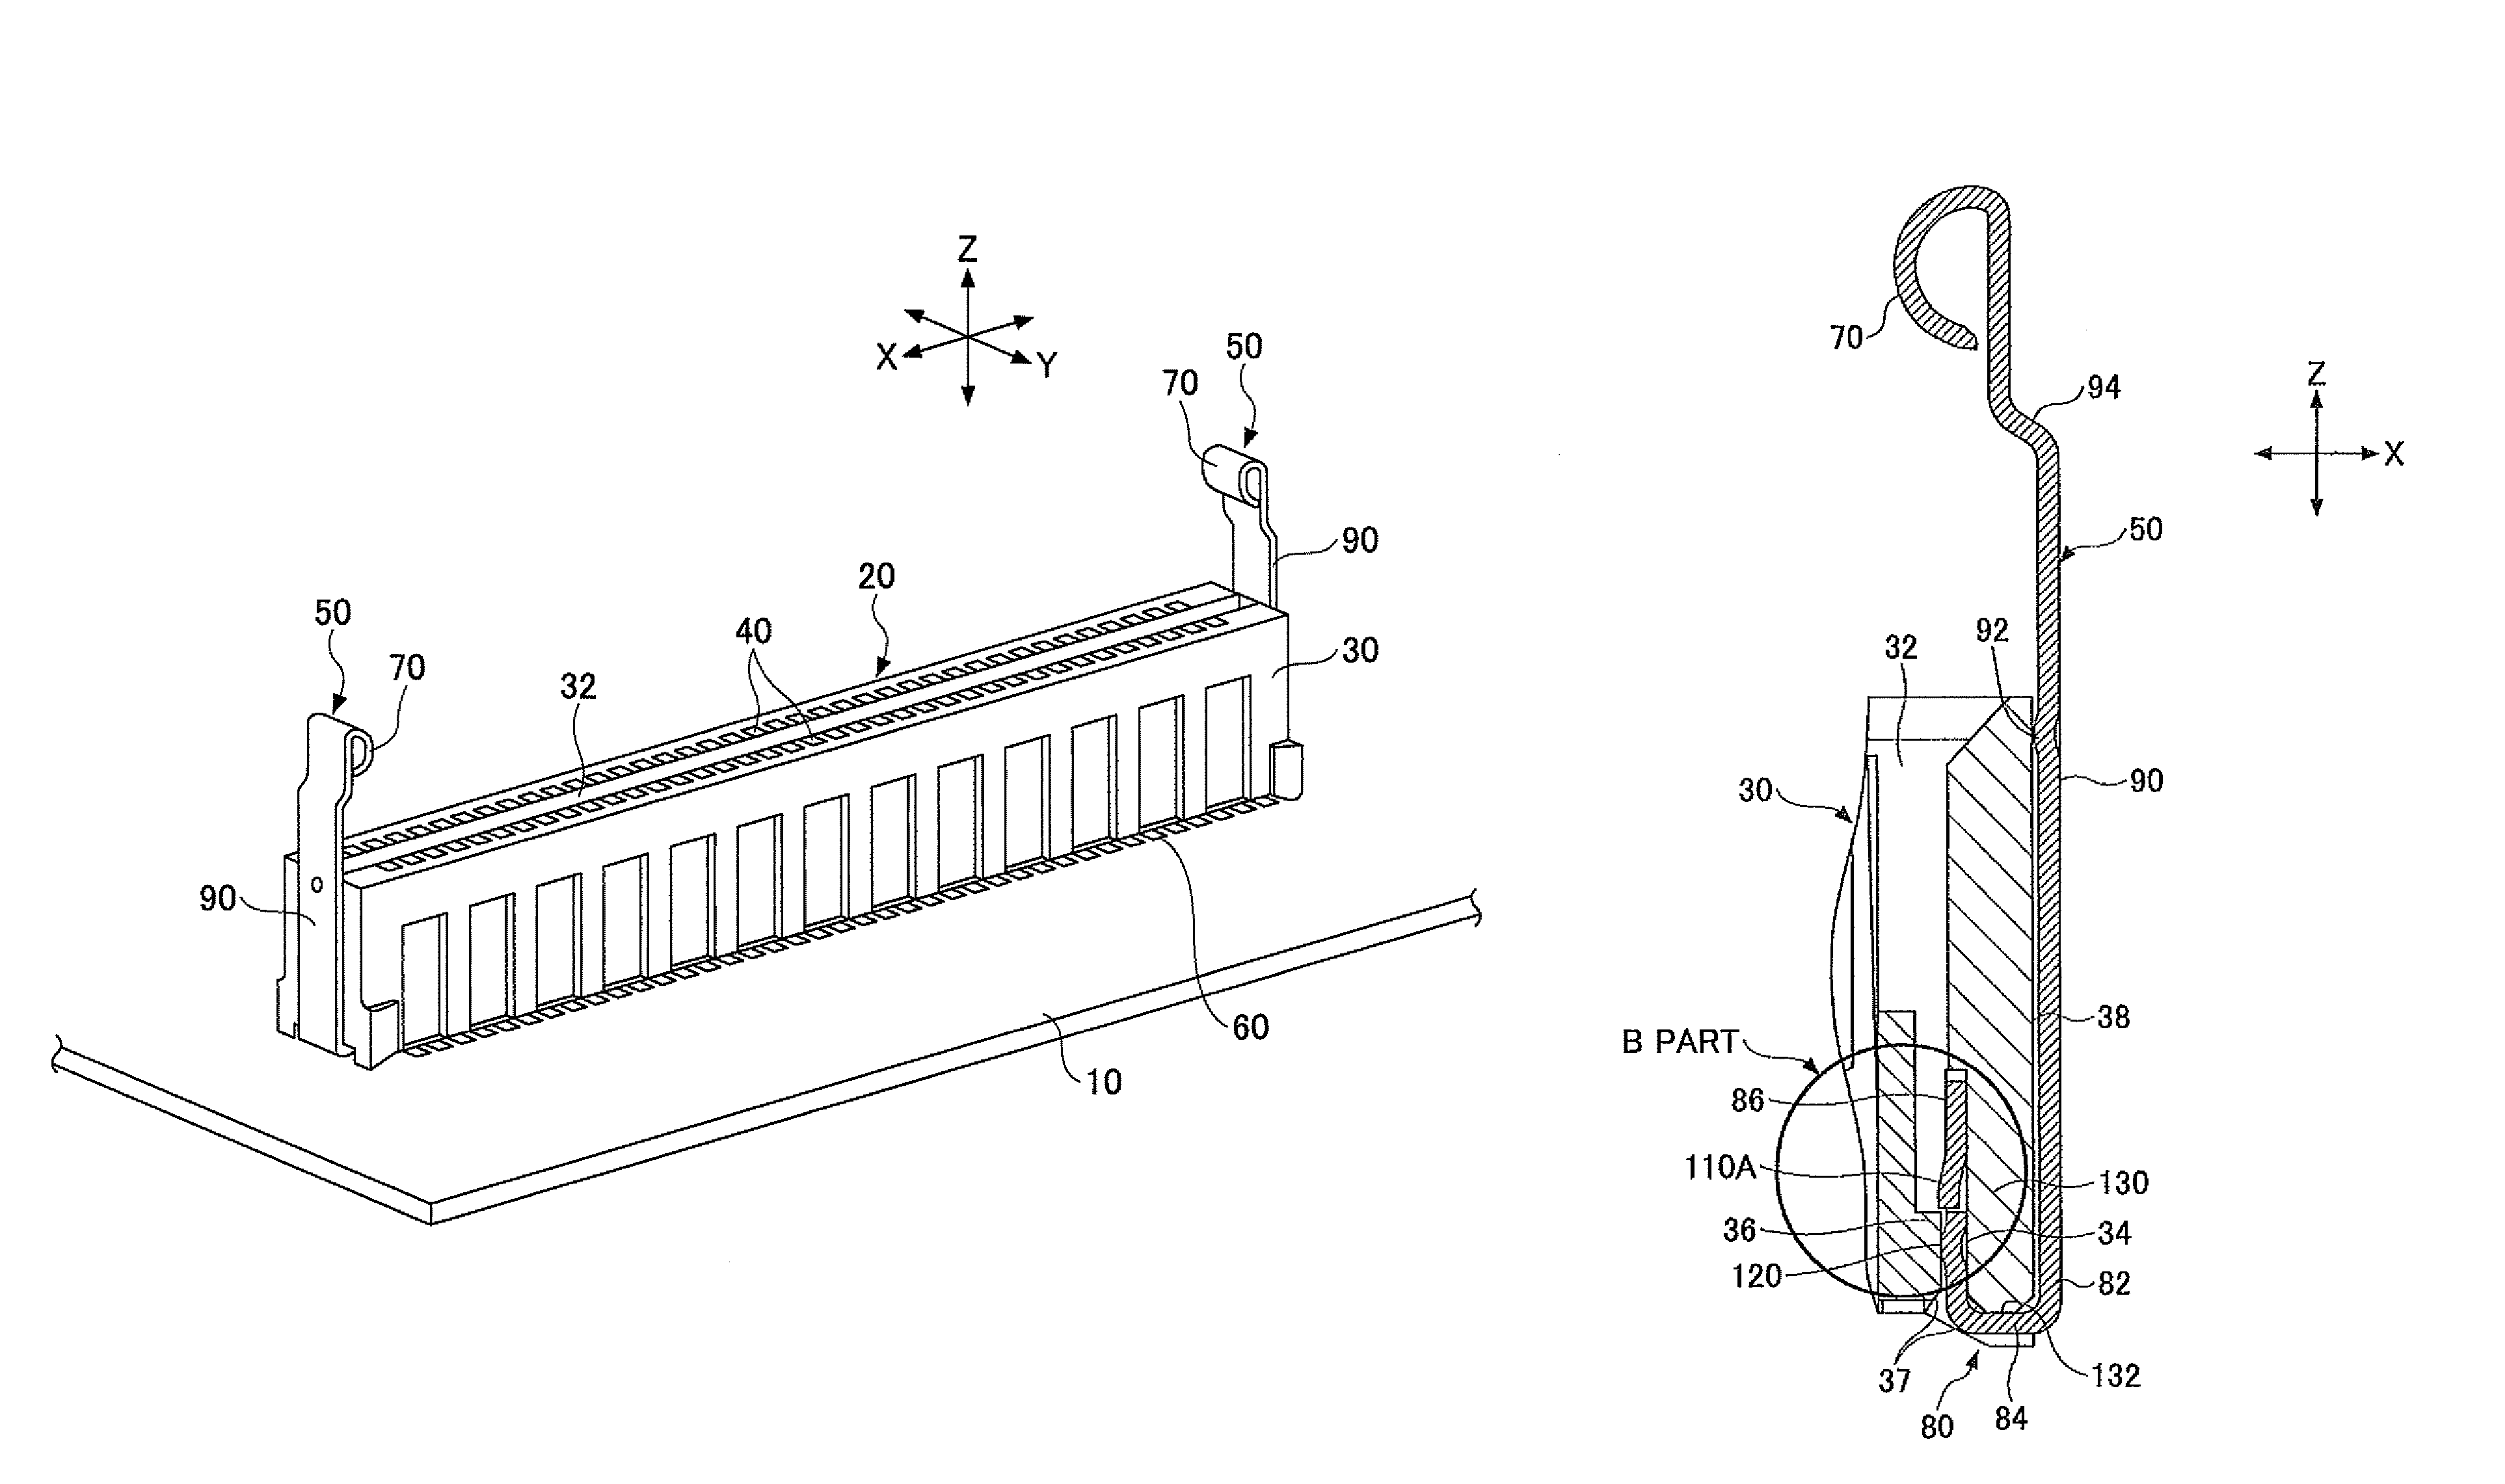 Board connecting connector with board holding device